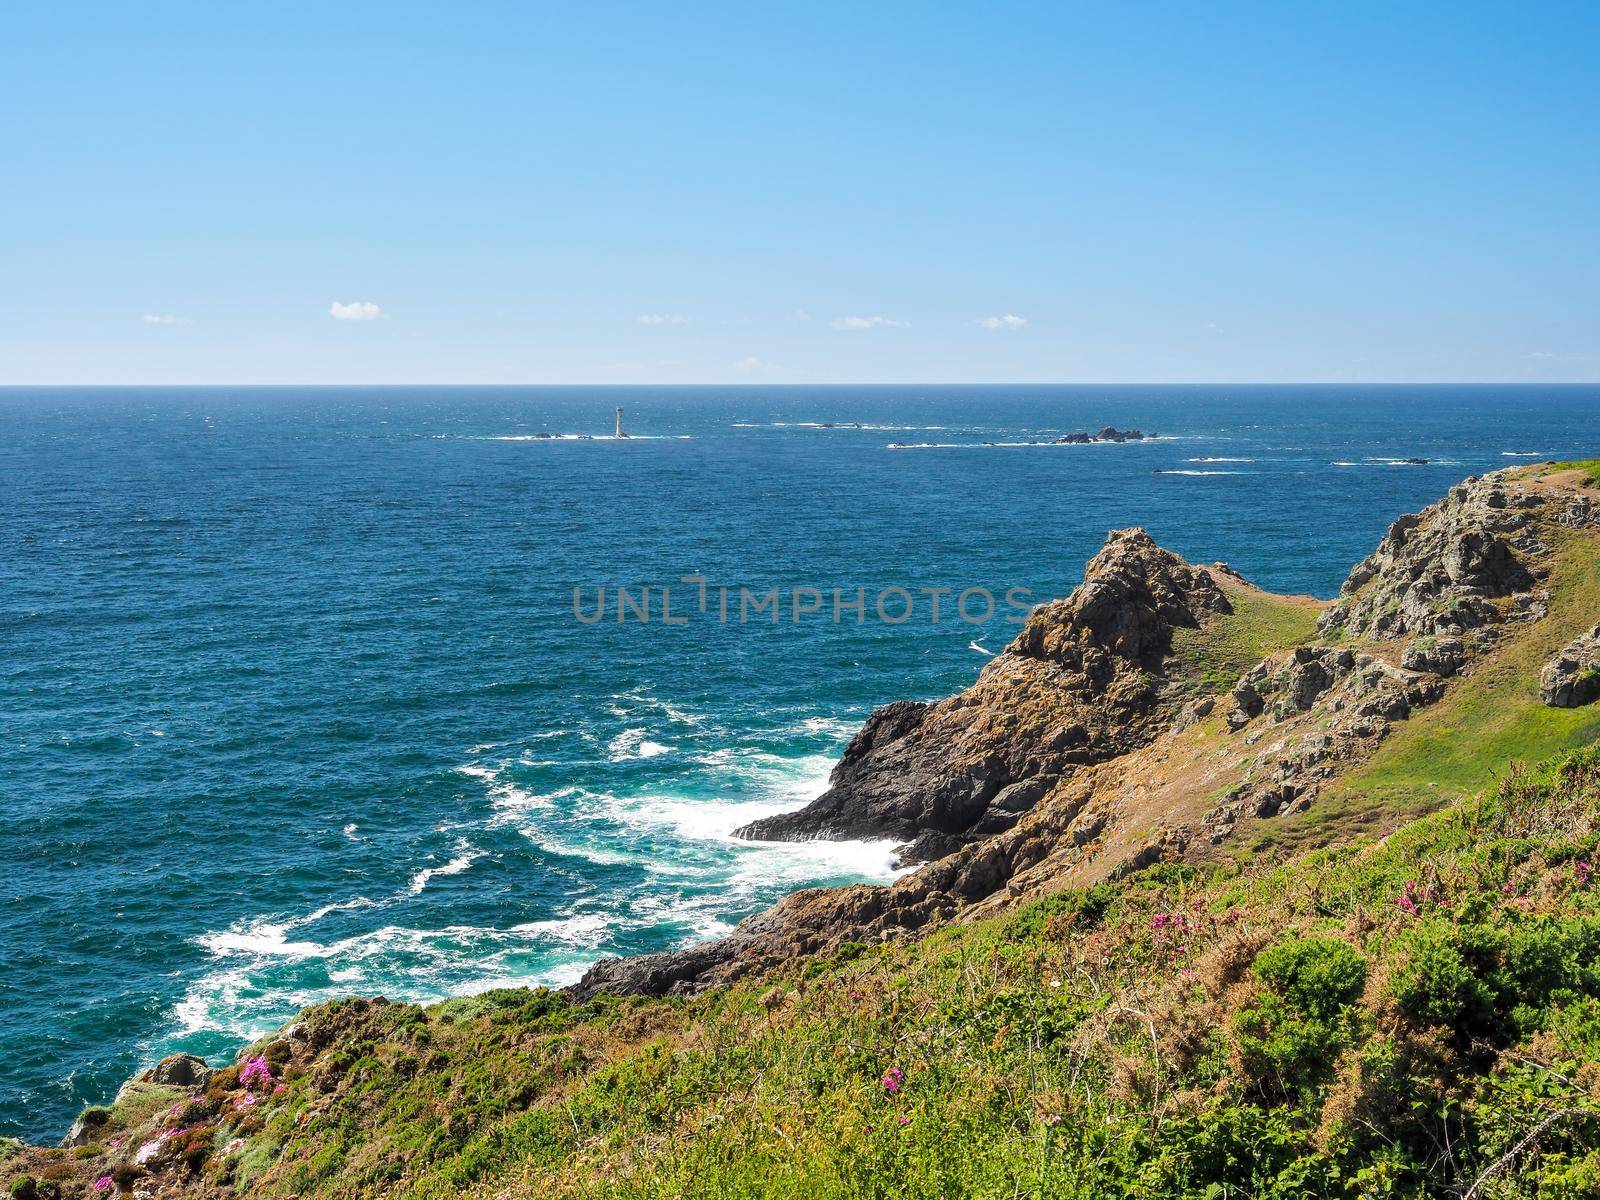 View across rocky bay to Les Hanois Lighthouse on Le Biseau rock, under blue sky and white clouds, Pleinmont, Guernsey, Channel Islands